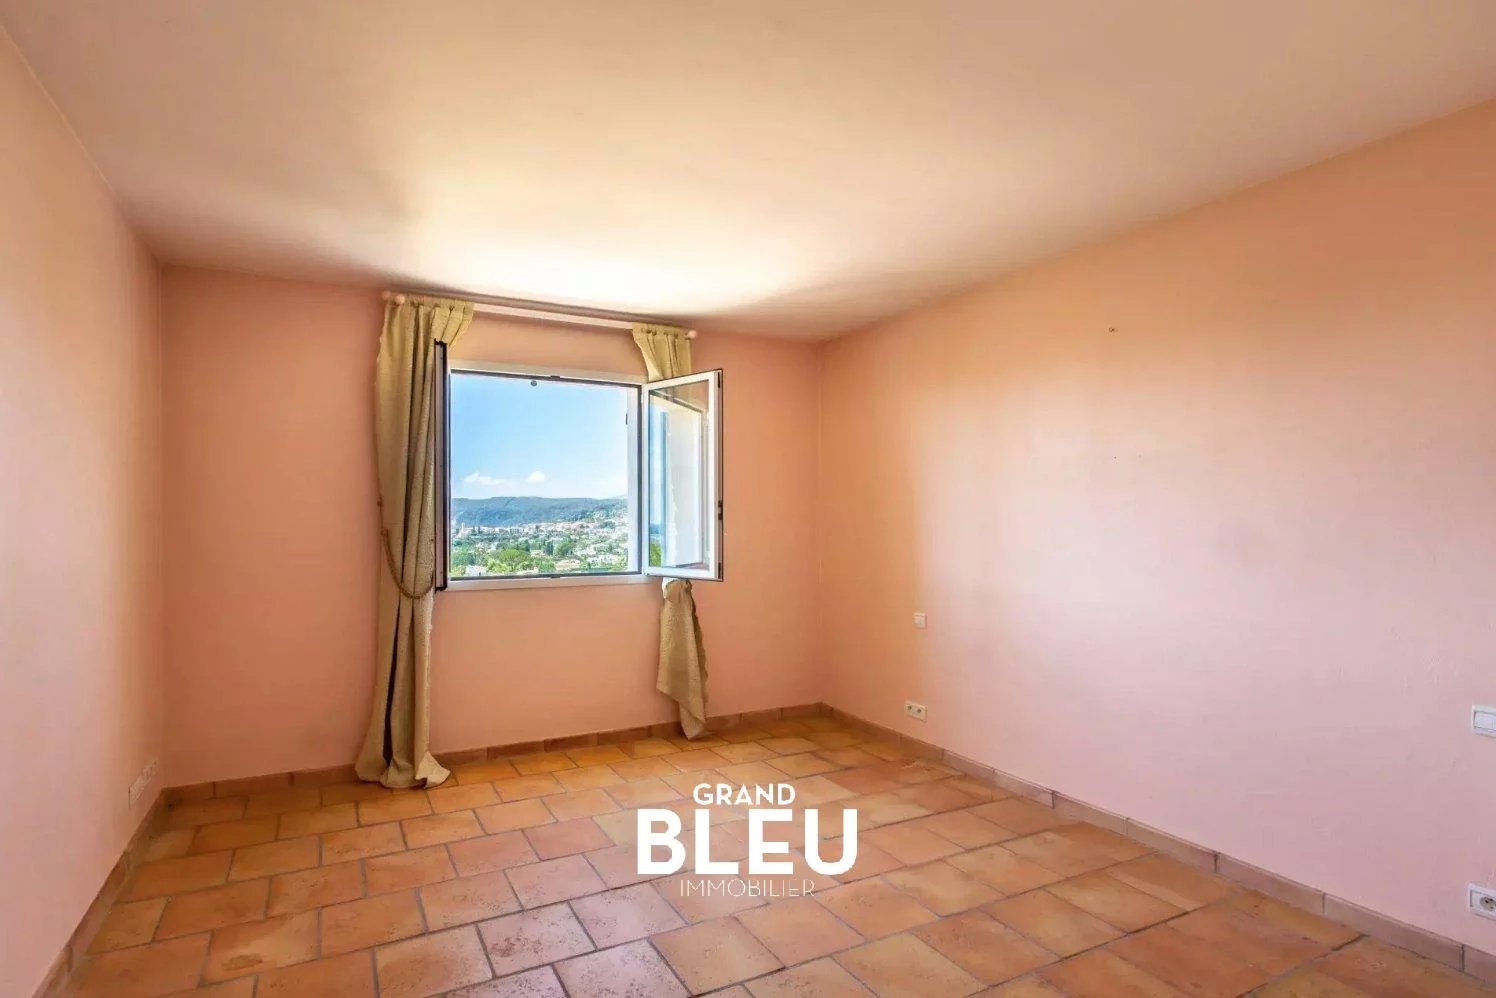 Family villa with pool and panoramic view in St Paul de Vence